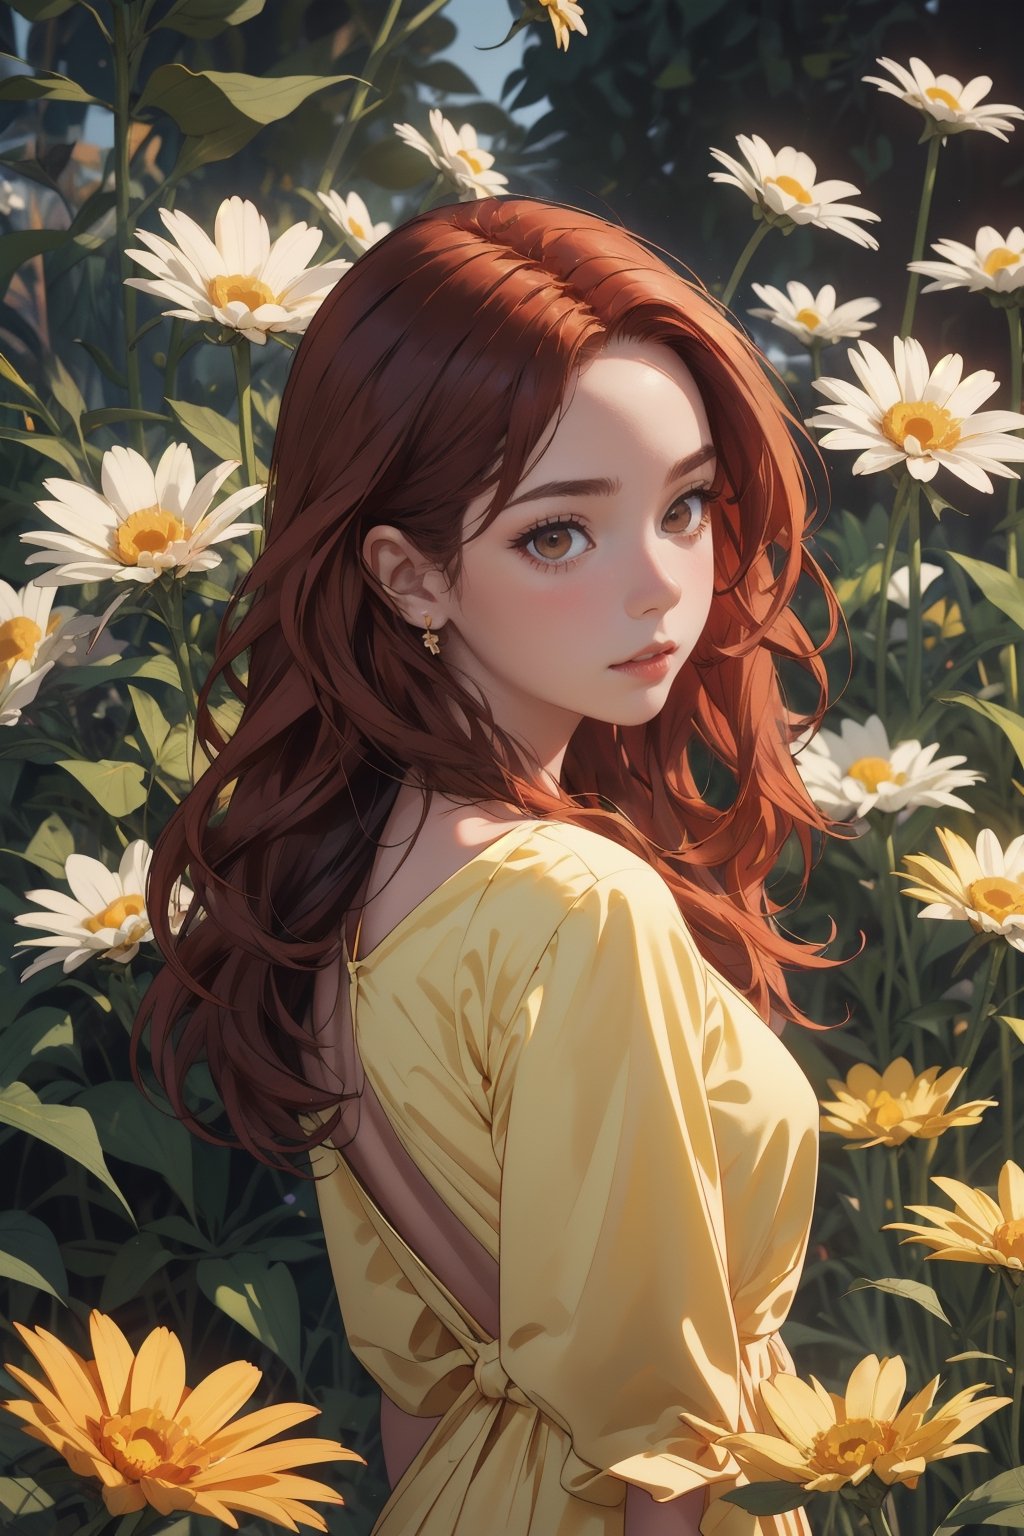 (1 Girl) long red hair, brown eyes, brown_skin, wearing a beautiful yellow flowered dress, daisy garden background, low lighting, detailed_eyes, detailed_face, detailed_hands, backgroung_detailed, cinema_lighting, colorful_portrait, Midjourney, full_body, midjourney style.